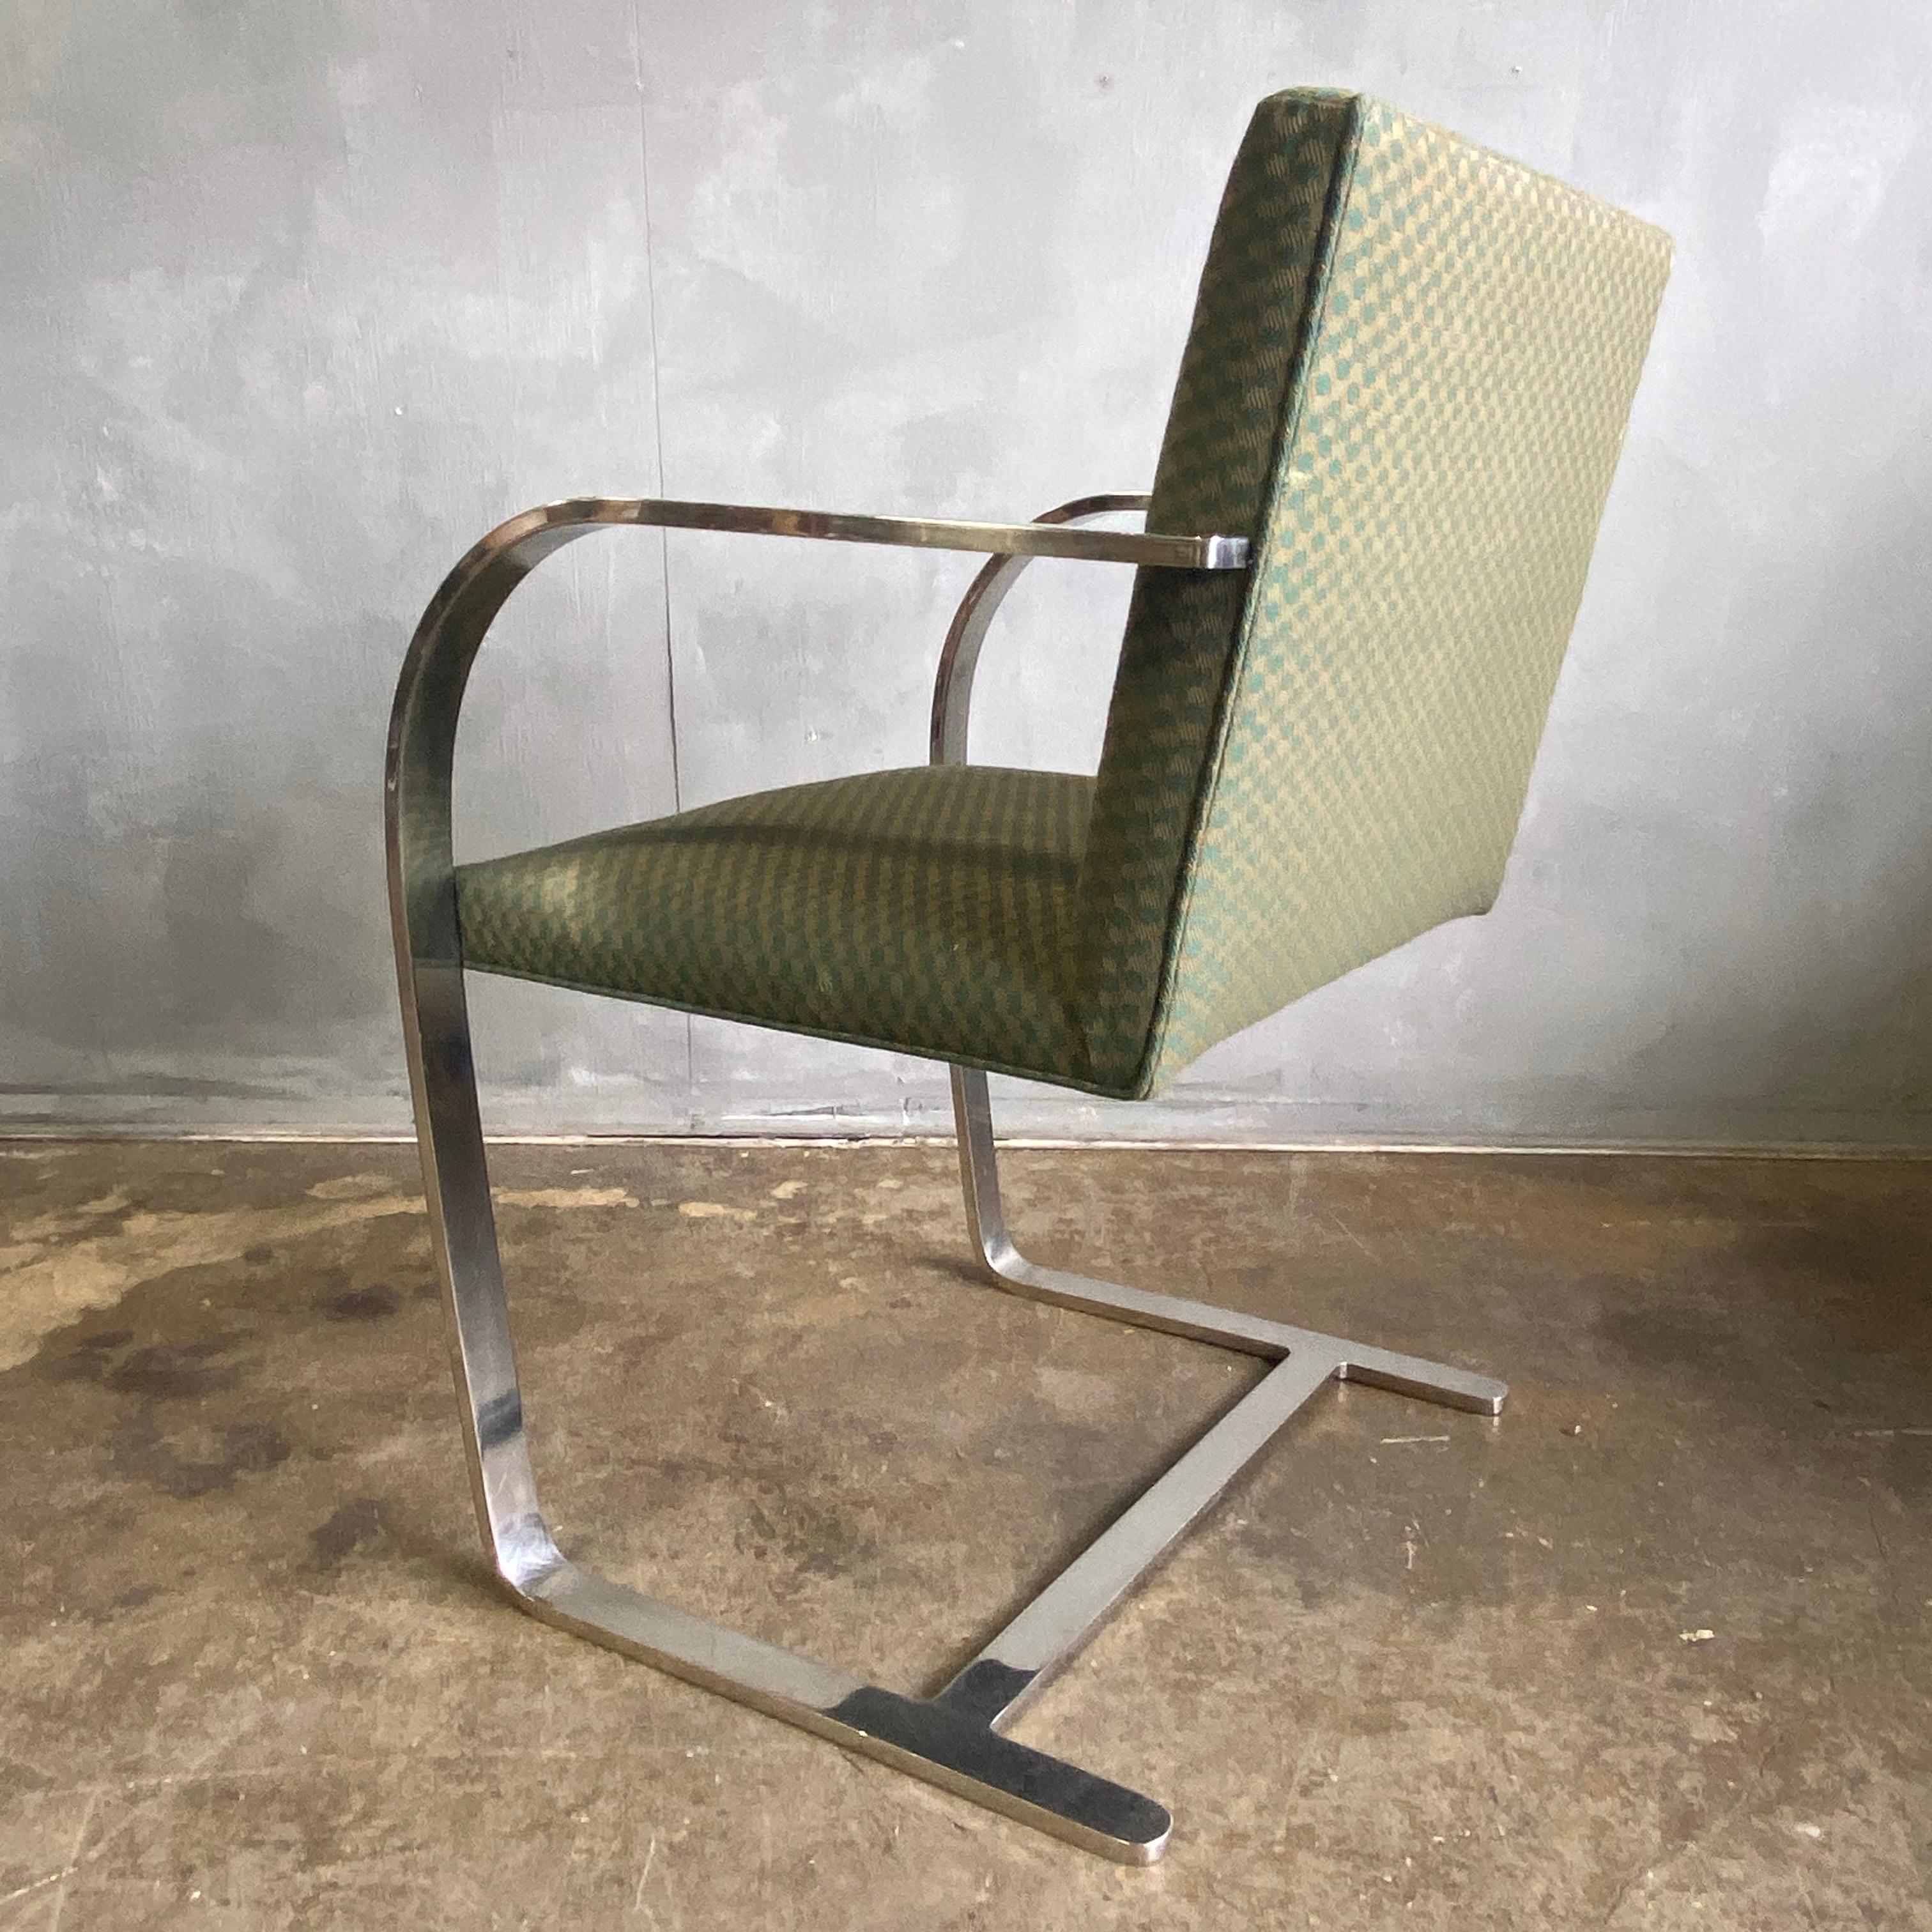 Italian Midcentury Brno Armchairs for Knoll in Stainless Steel